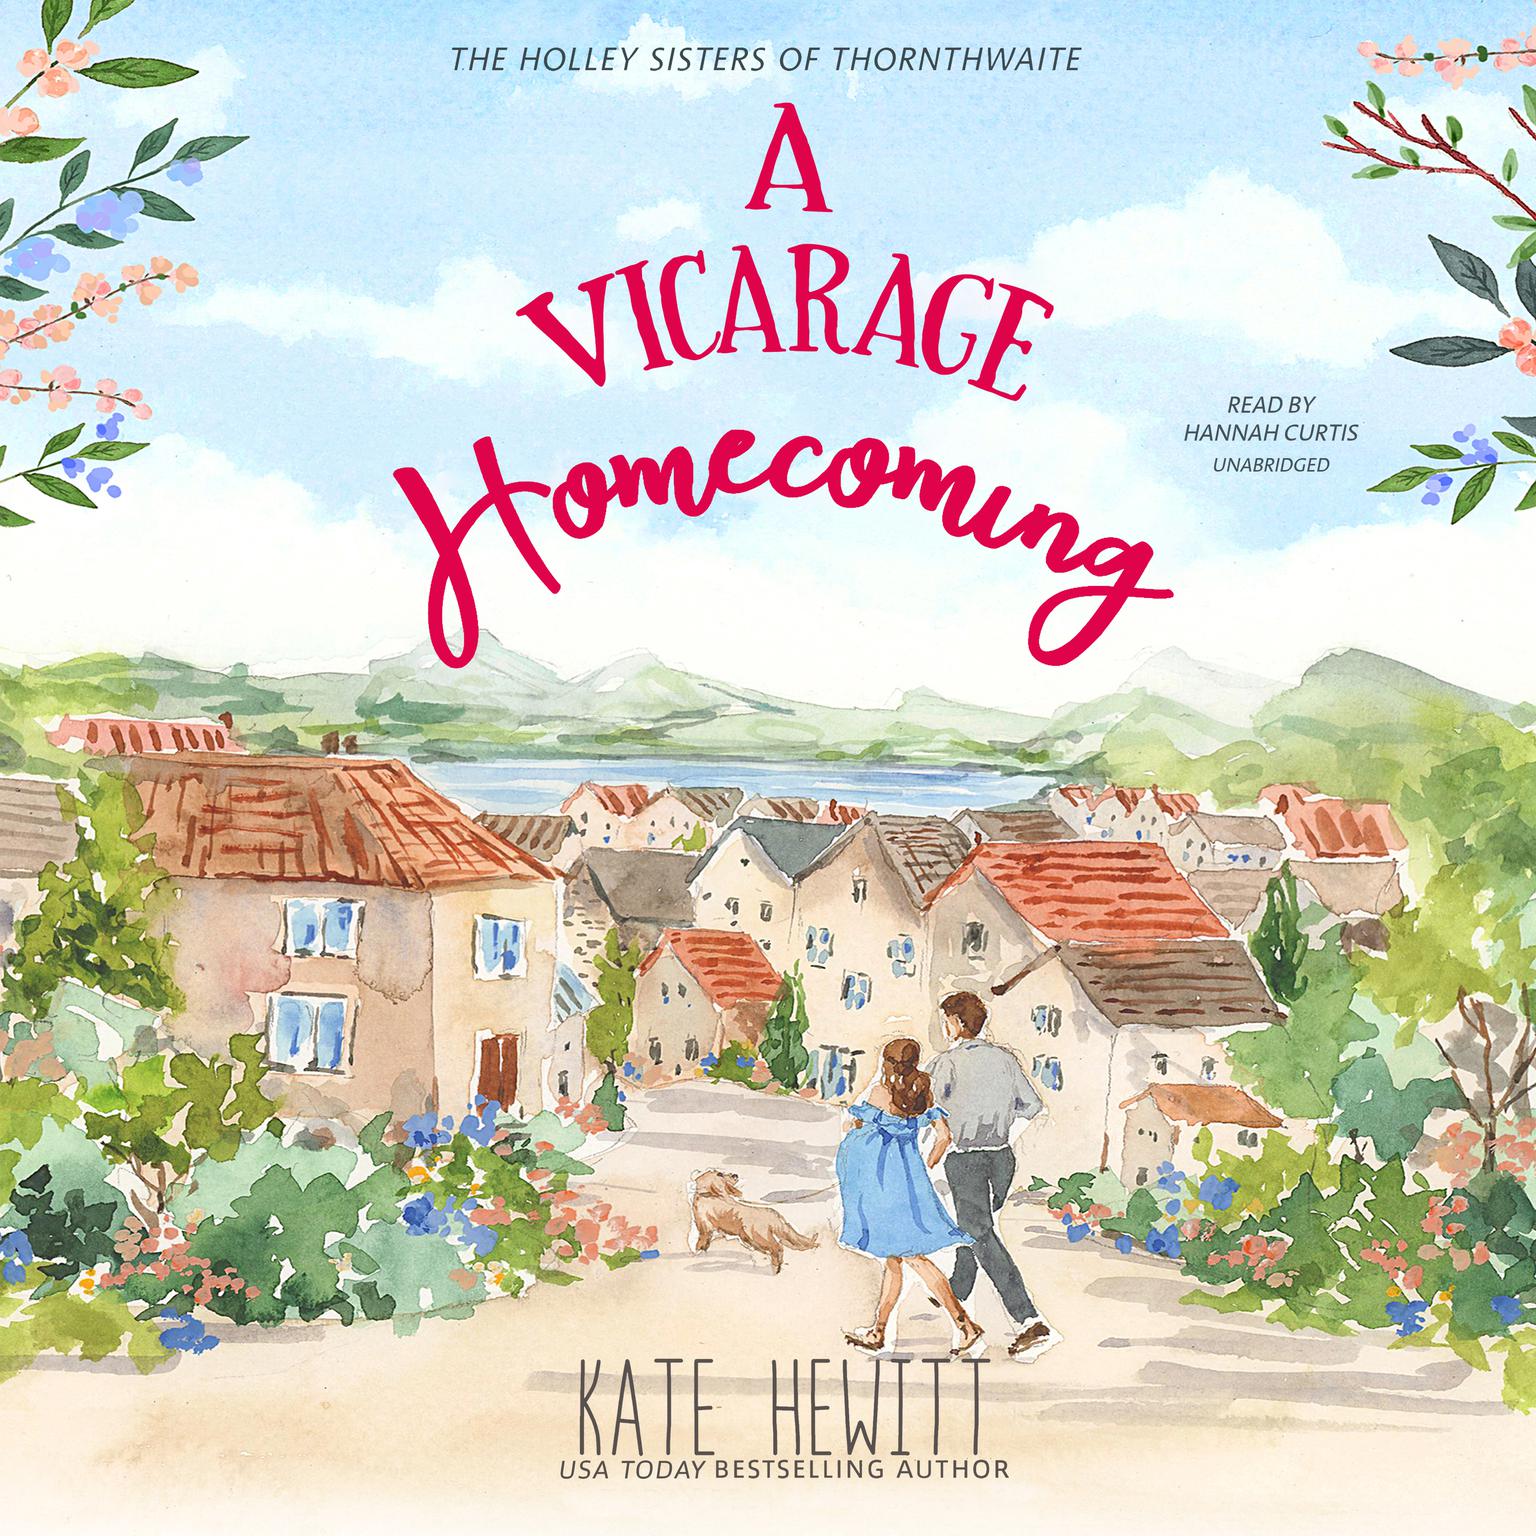 A Vicarage Homecoming: A Holley Sisters of Thornthwaite Romance Audiobook, by Kate Hewitt